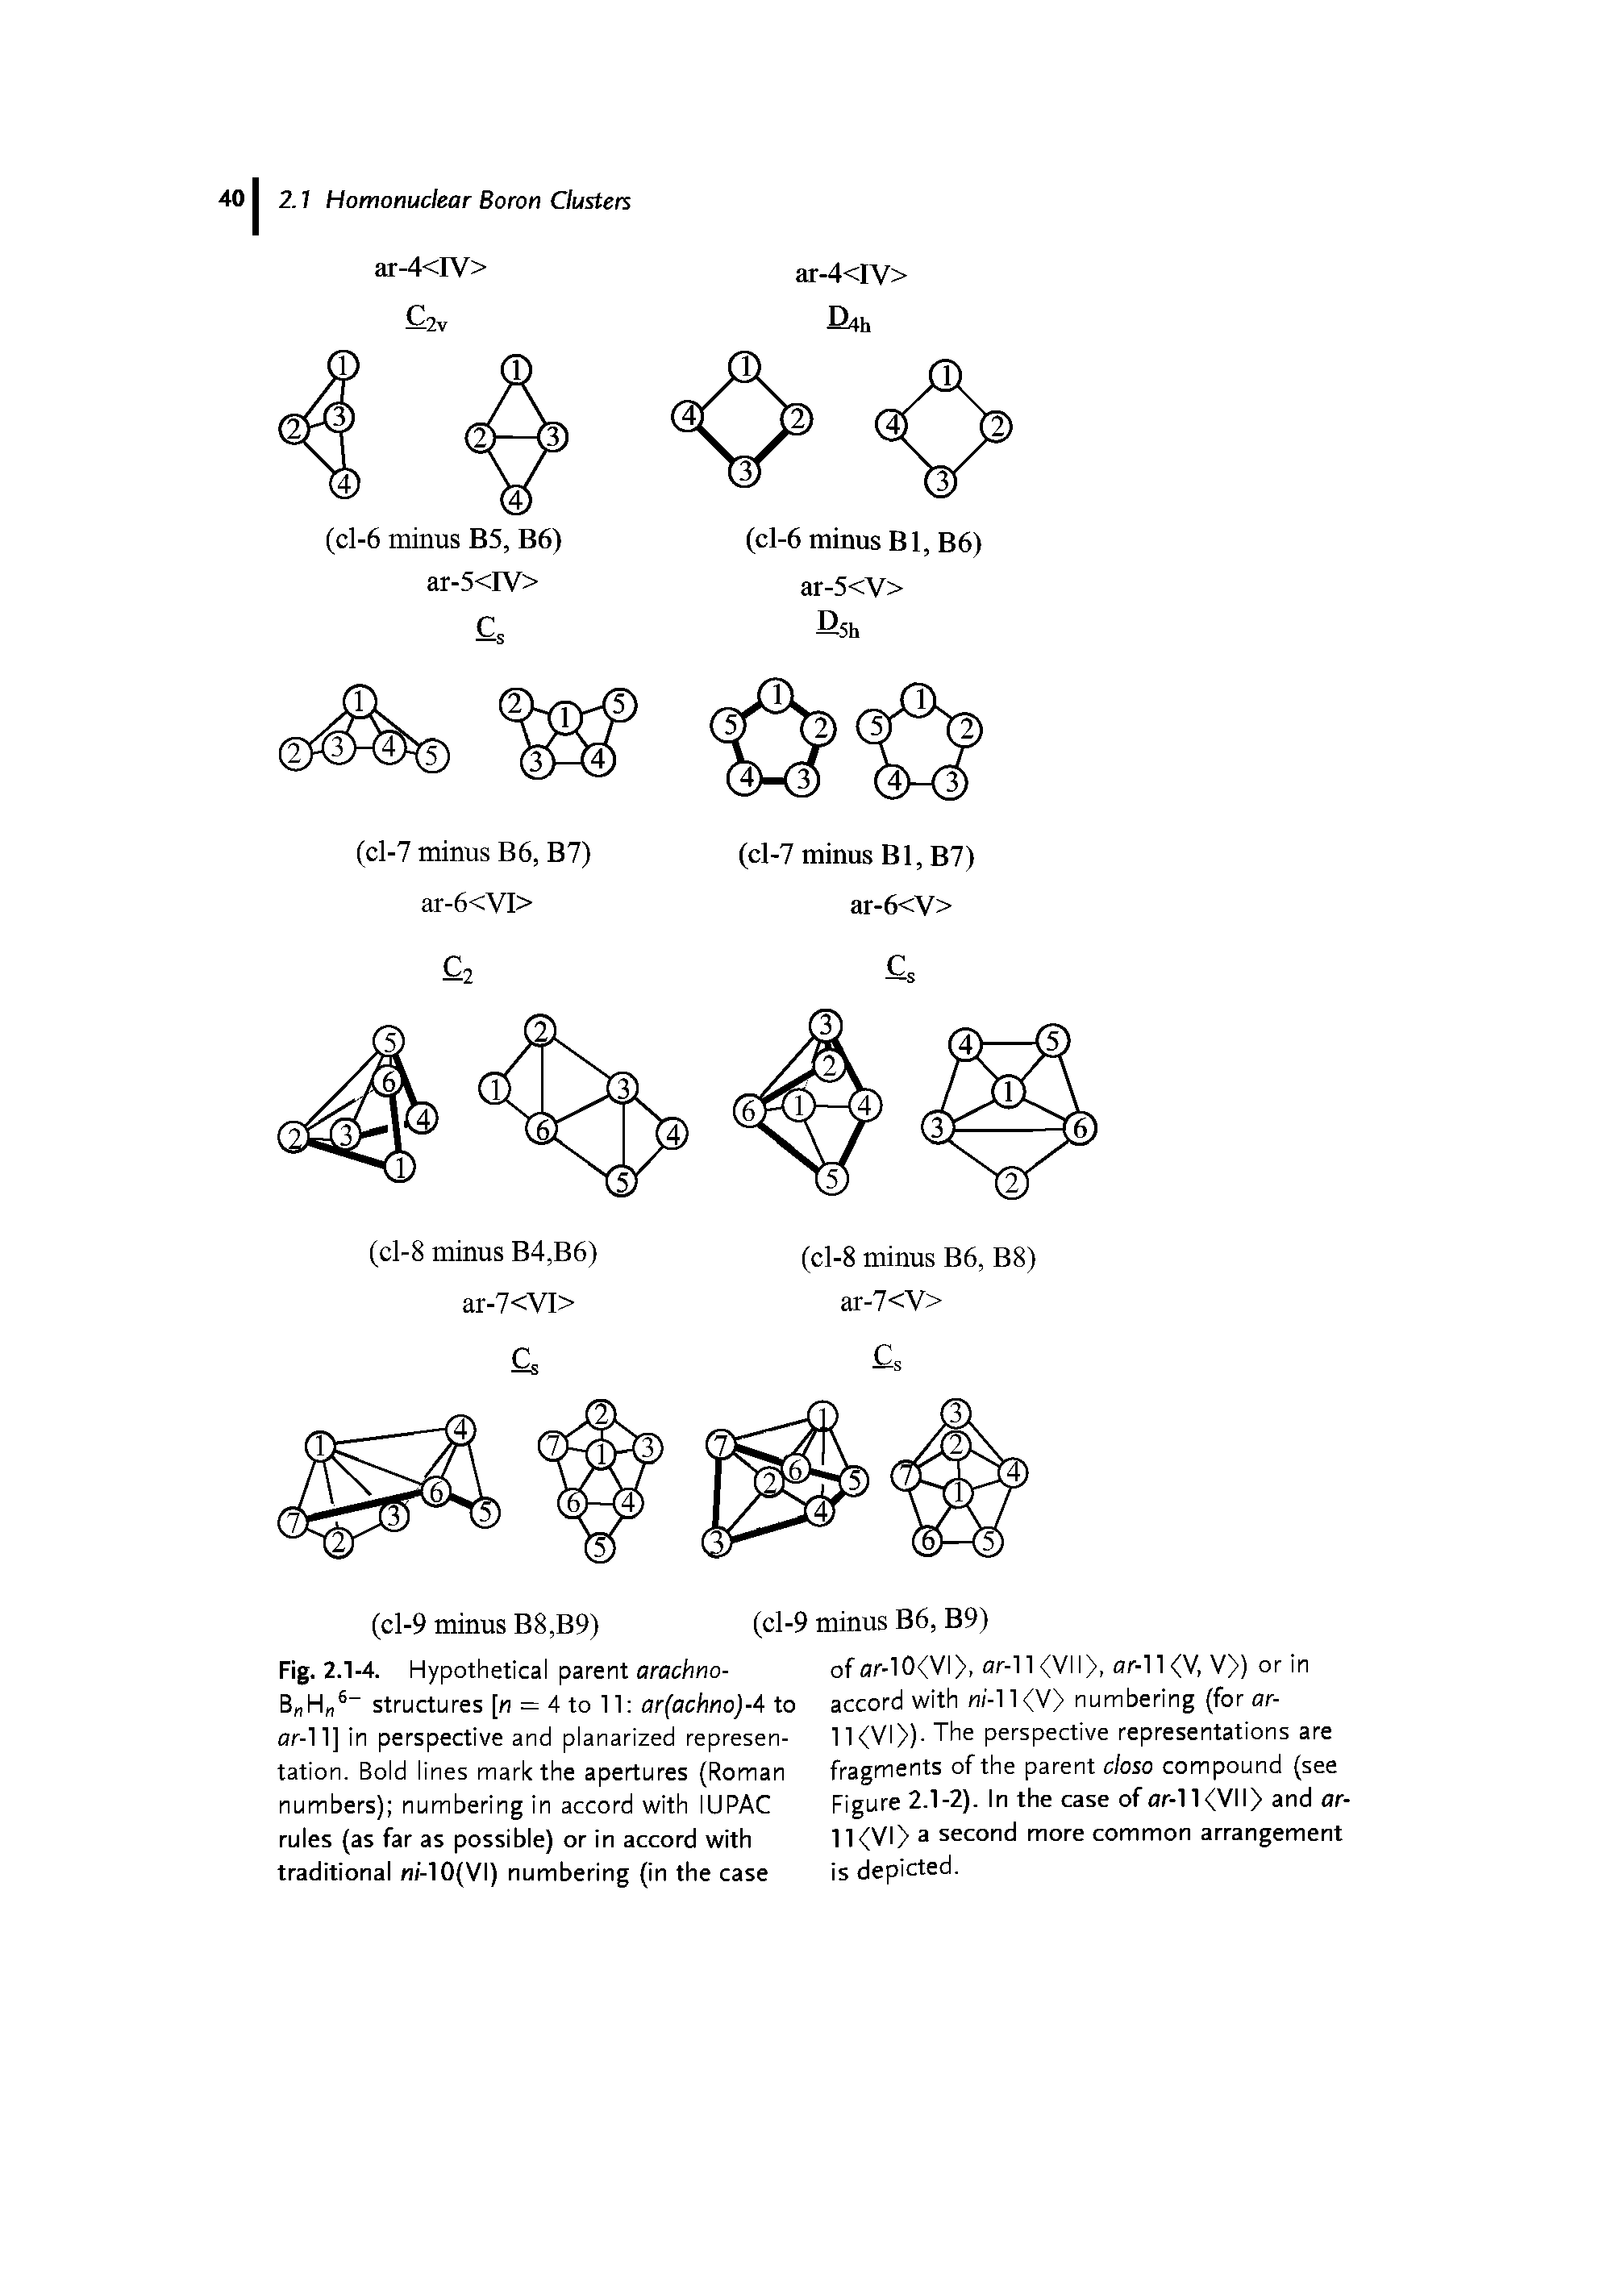 Fig. 2.1-4. Hypothetical parent arachno-B H 6- structures [n = 4 to 11 ar(achno)-A to flr-11] in perspective and planarized representation. Bold lines mark the apertures (Roman numbers) numbering in accord with IUPAC rules (as far as possible) or in accord with traditional m -lO(VI) numbering (in the case...